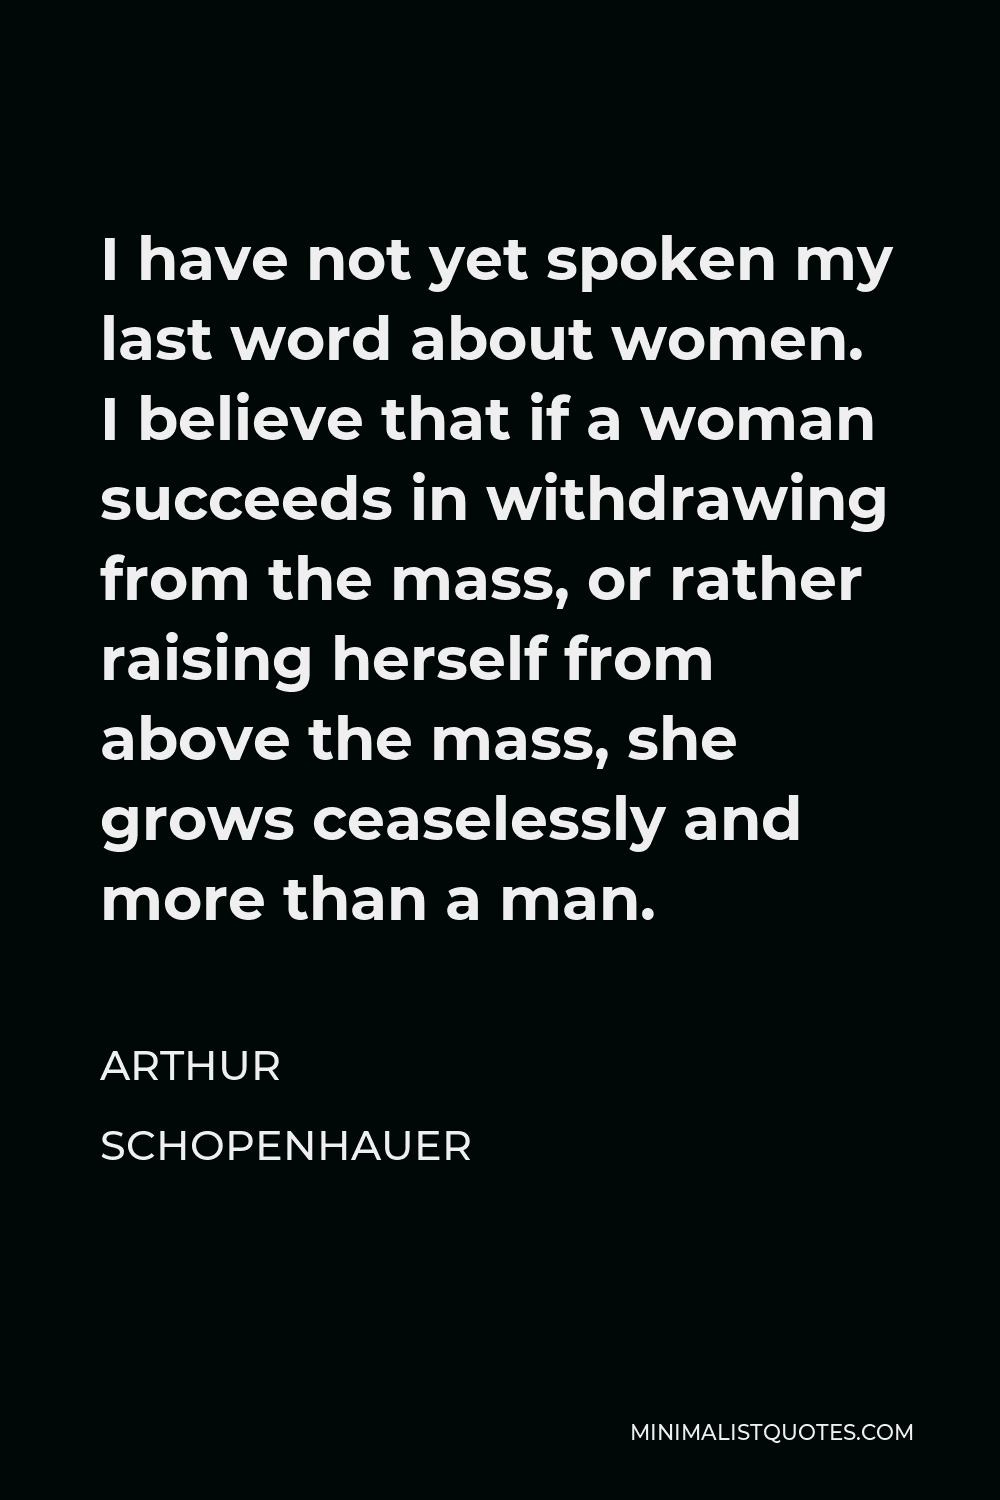 Arthur Schopenhauer Quote A Sense Of Humor Is The Only Divine Quality Of Man